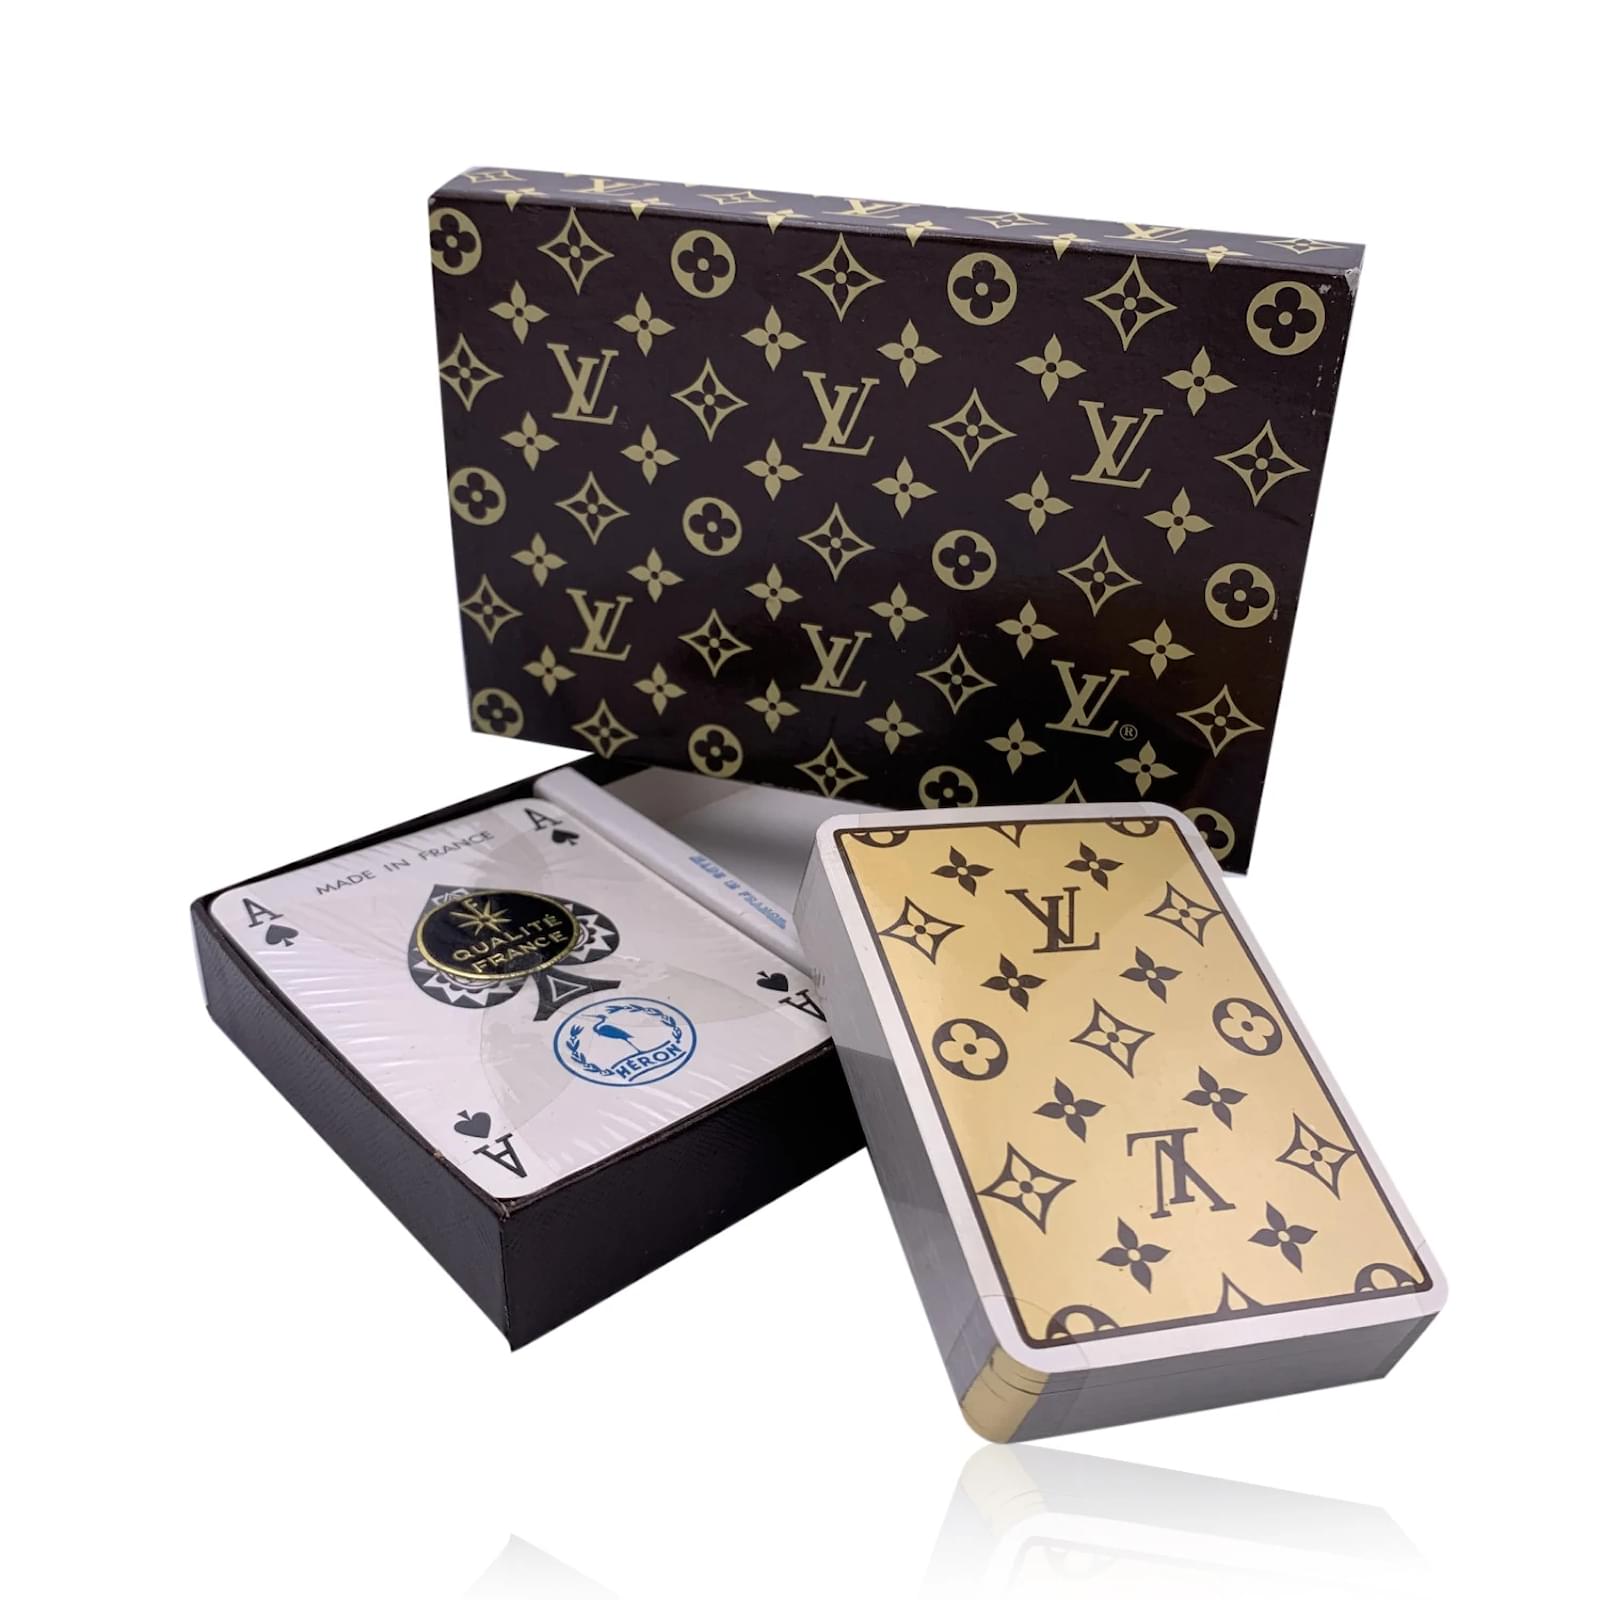 Louis Vuitton Twin Deck of BWF Playing Cards